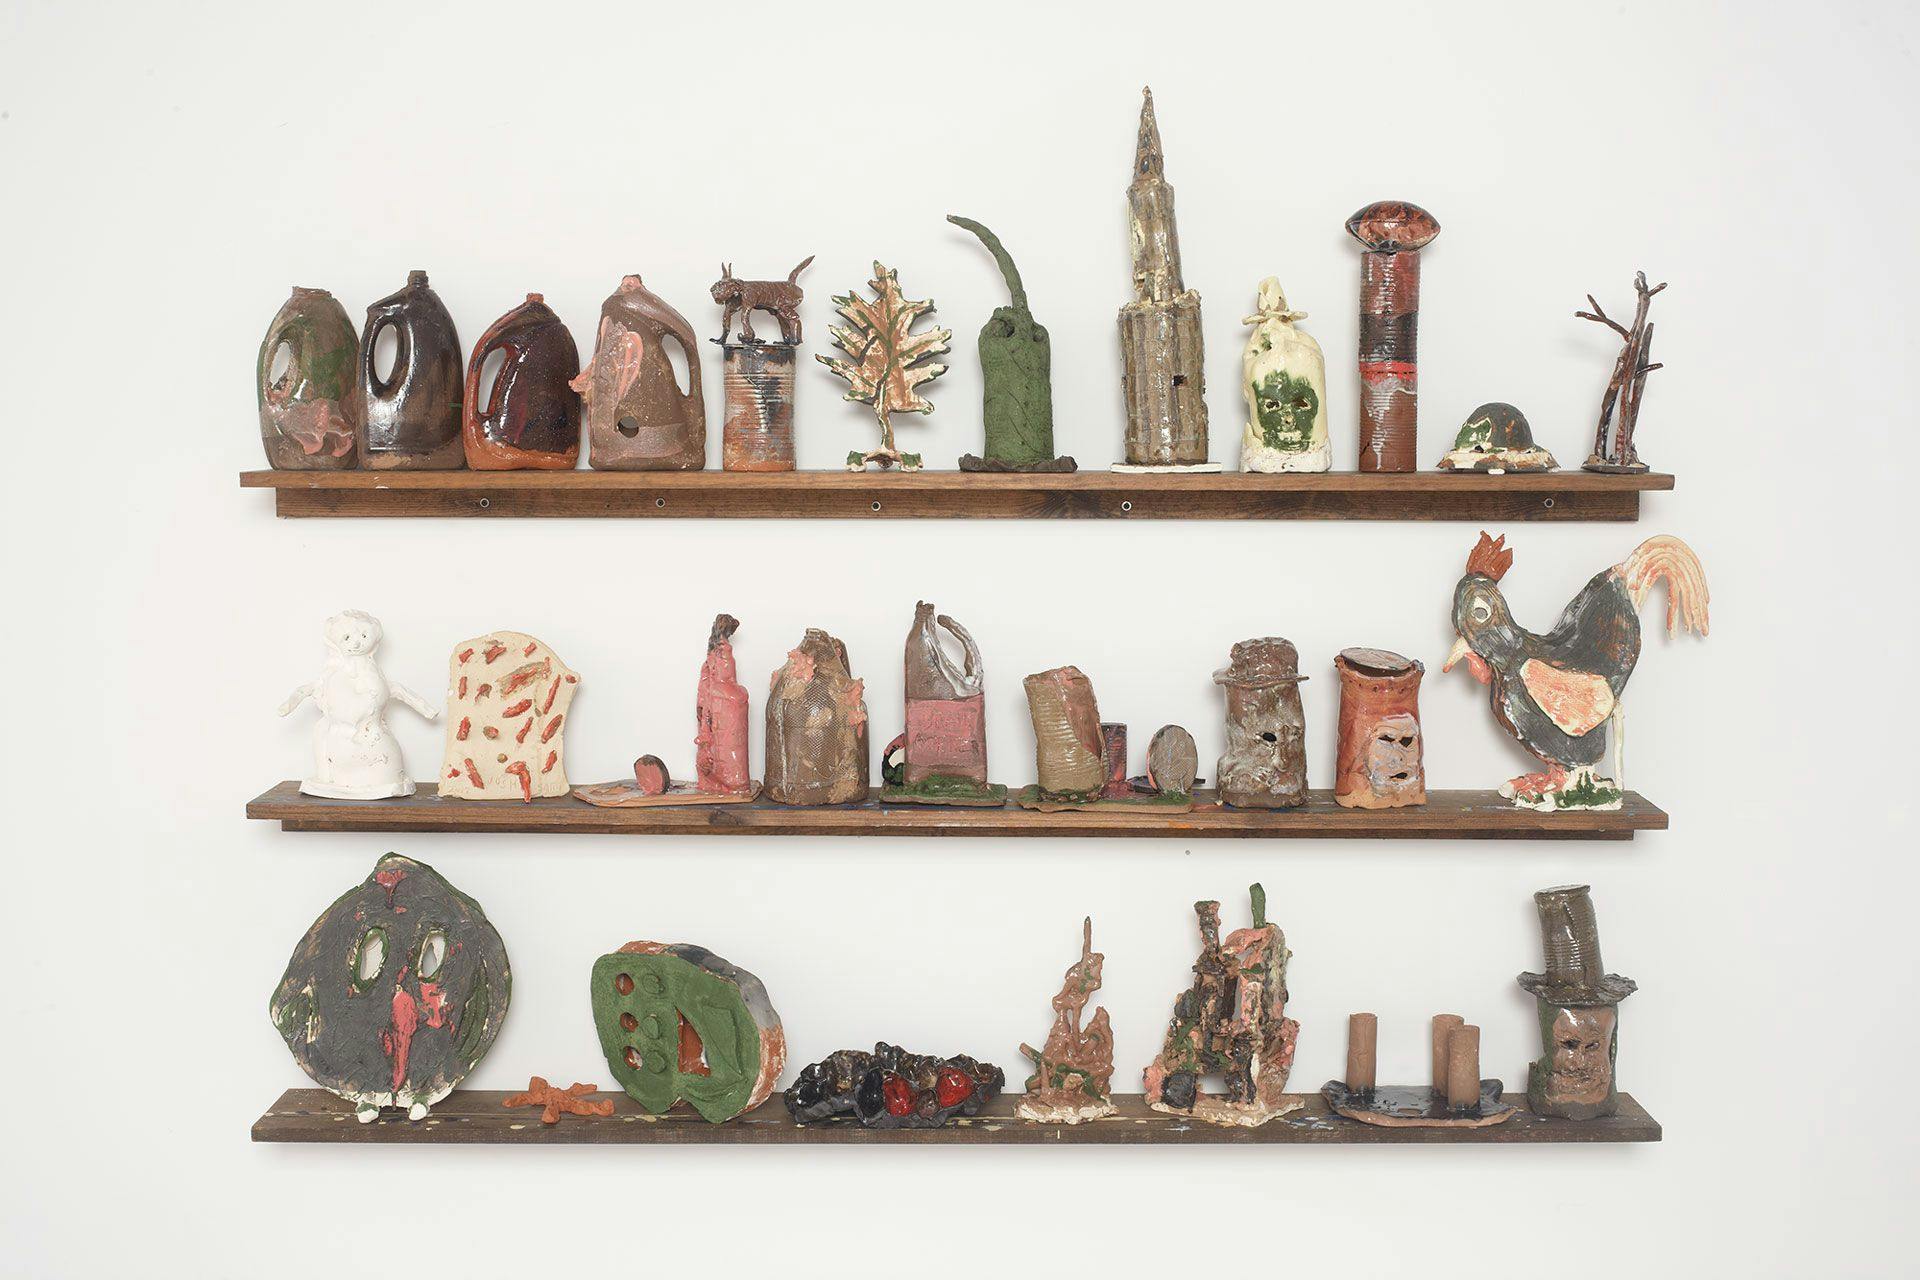 An untitled set of 29 ceramic sculptures by Josh Smith, dated 2013.